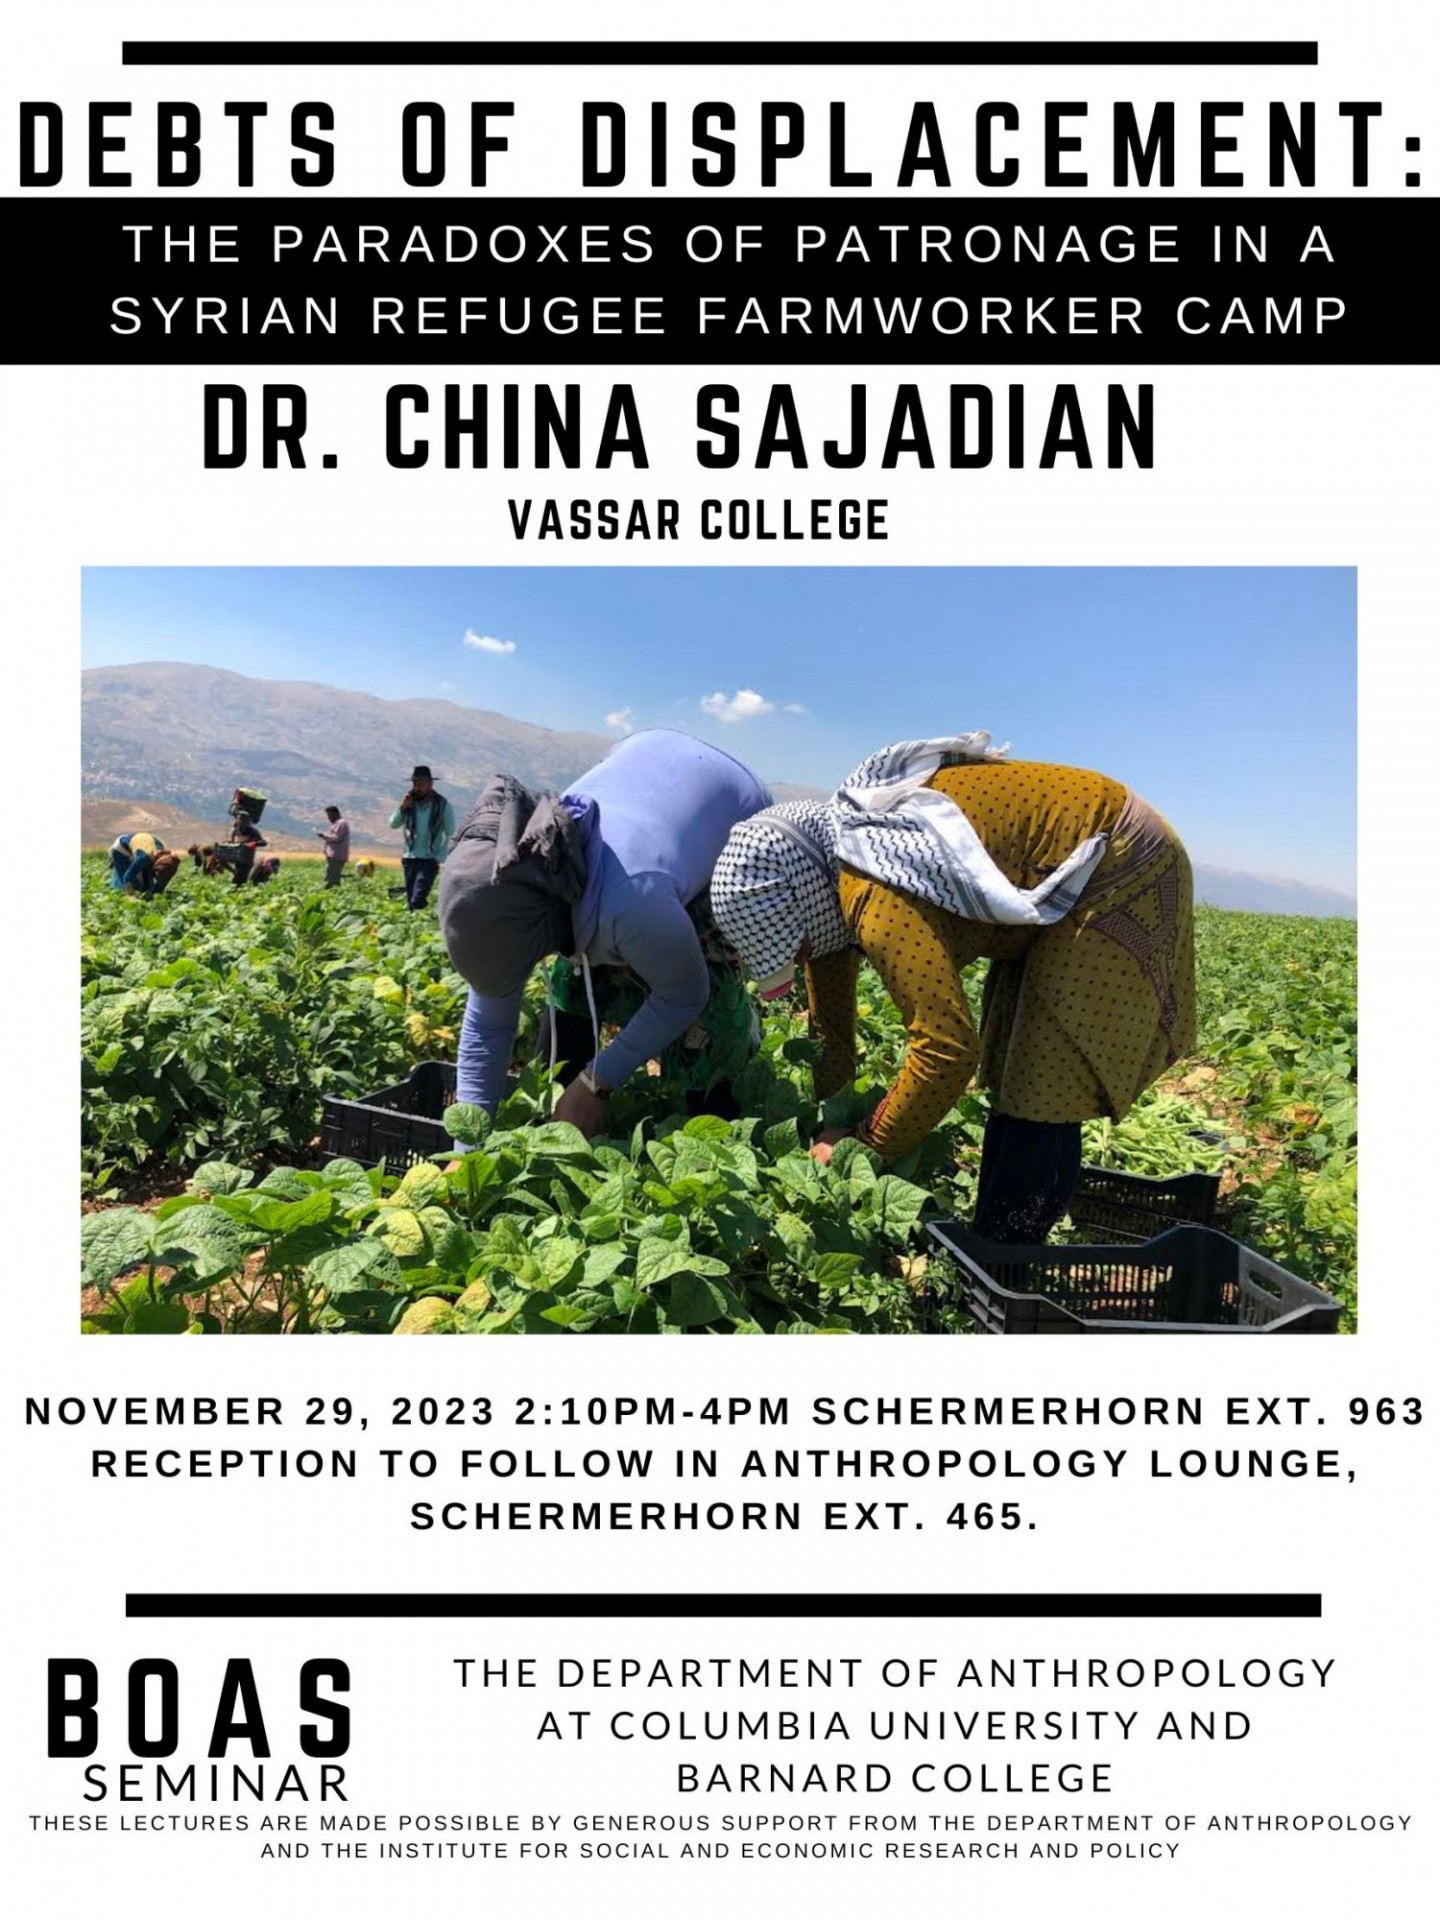 Wednesday, November 29th from 2:10-4 PM in 963 Schermerhorn Extension, Dr. China Sajadian will give a Boas Lecture on: "Debts of Displacement: The Paradoxes of Patronage in a Syrian Refugee Farmworker Camp.  A light reception will follow in 465 Schermerhorn Extension.